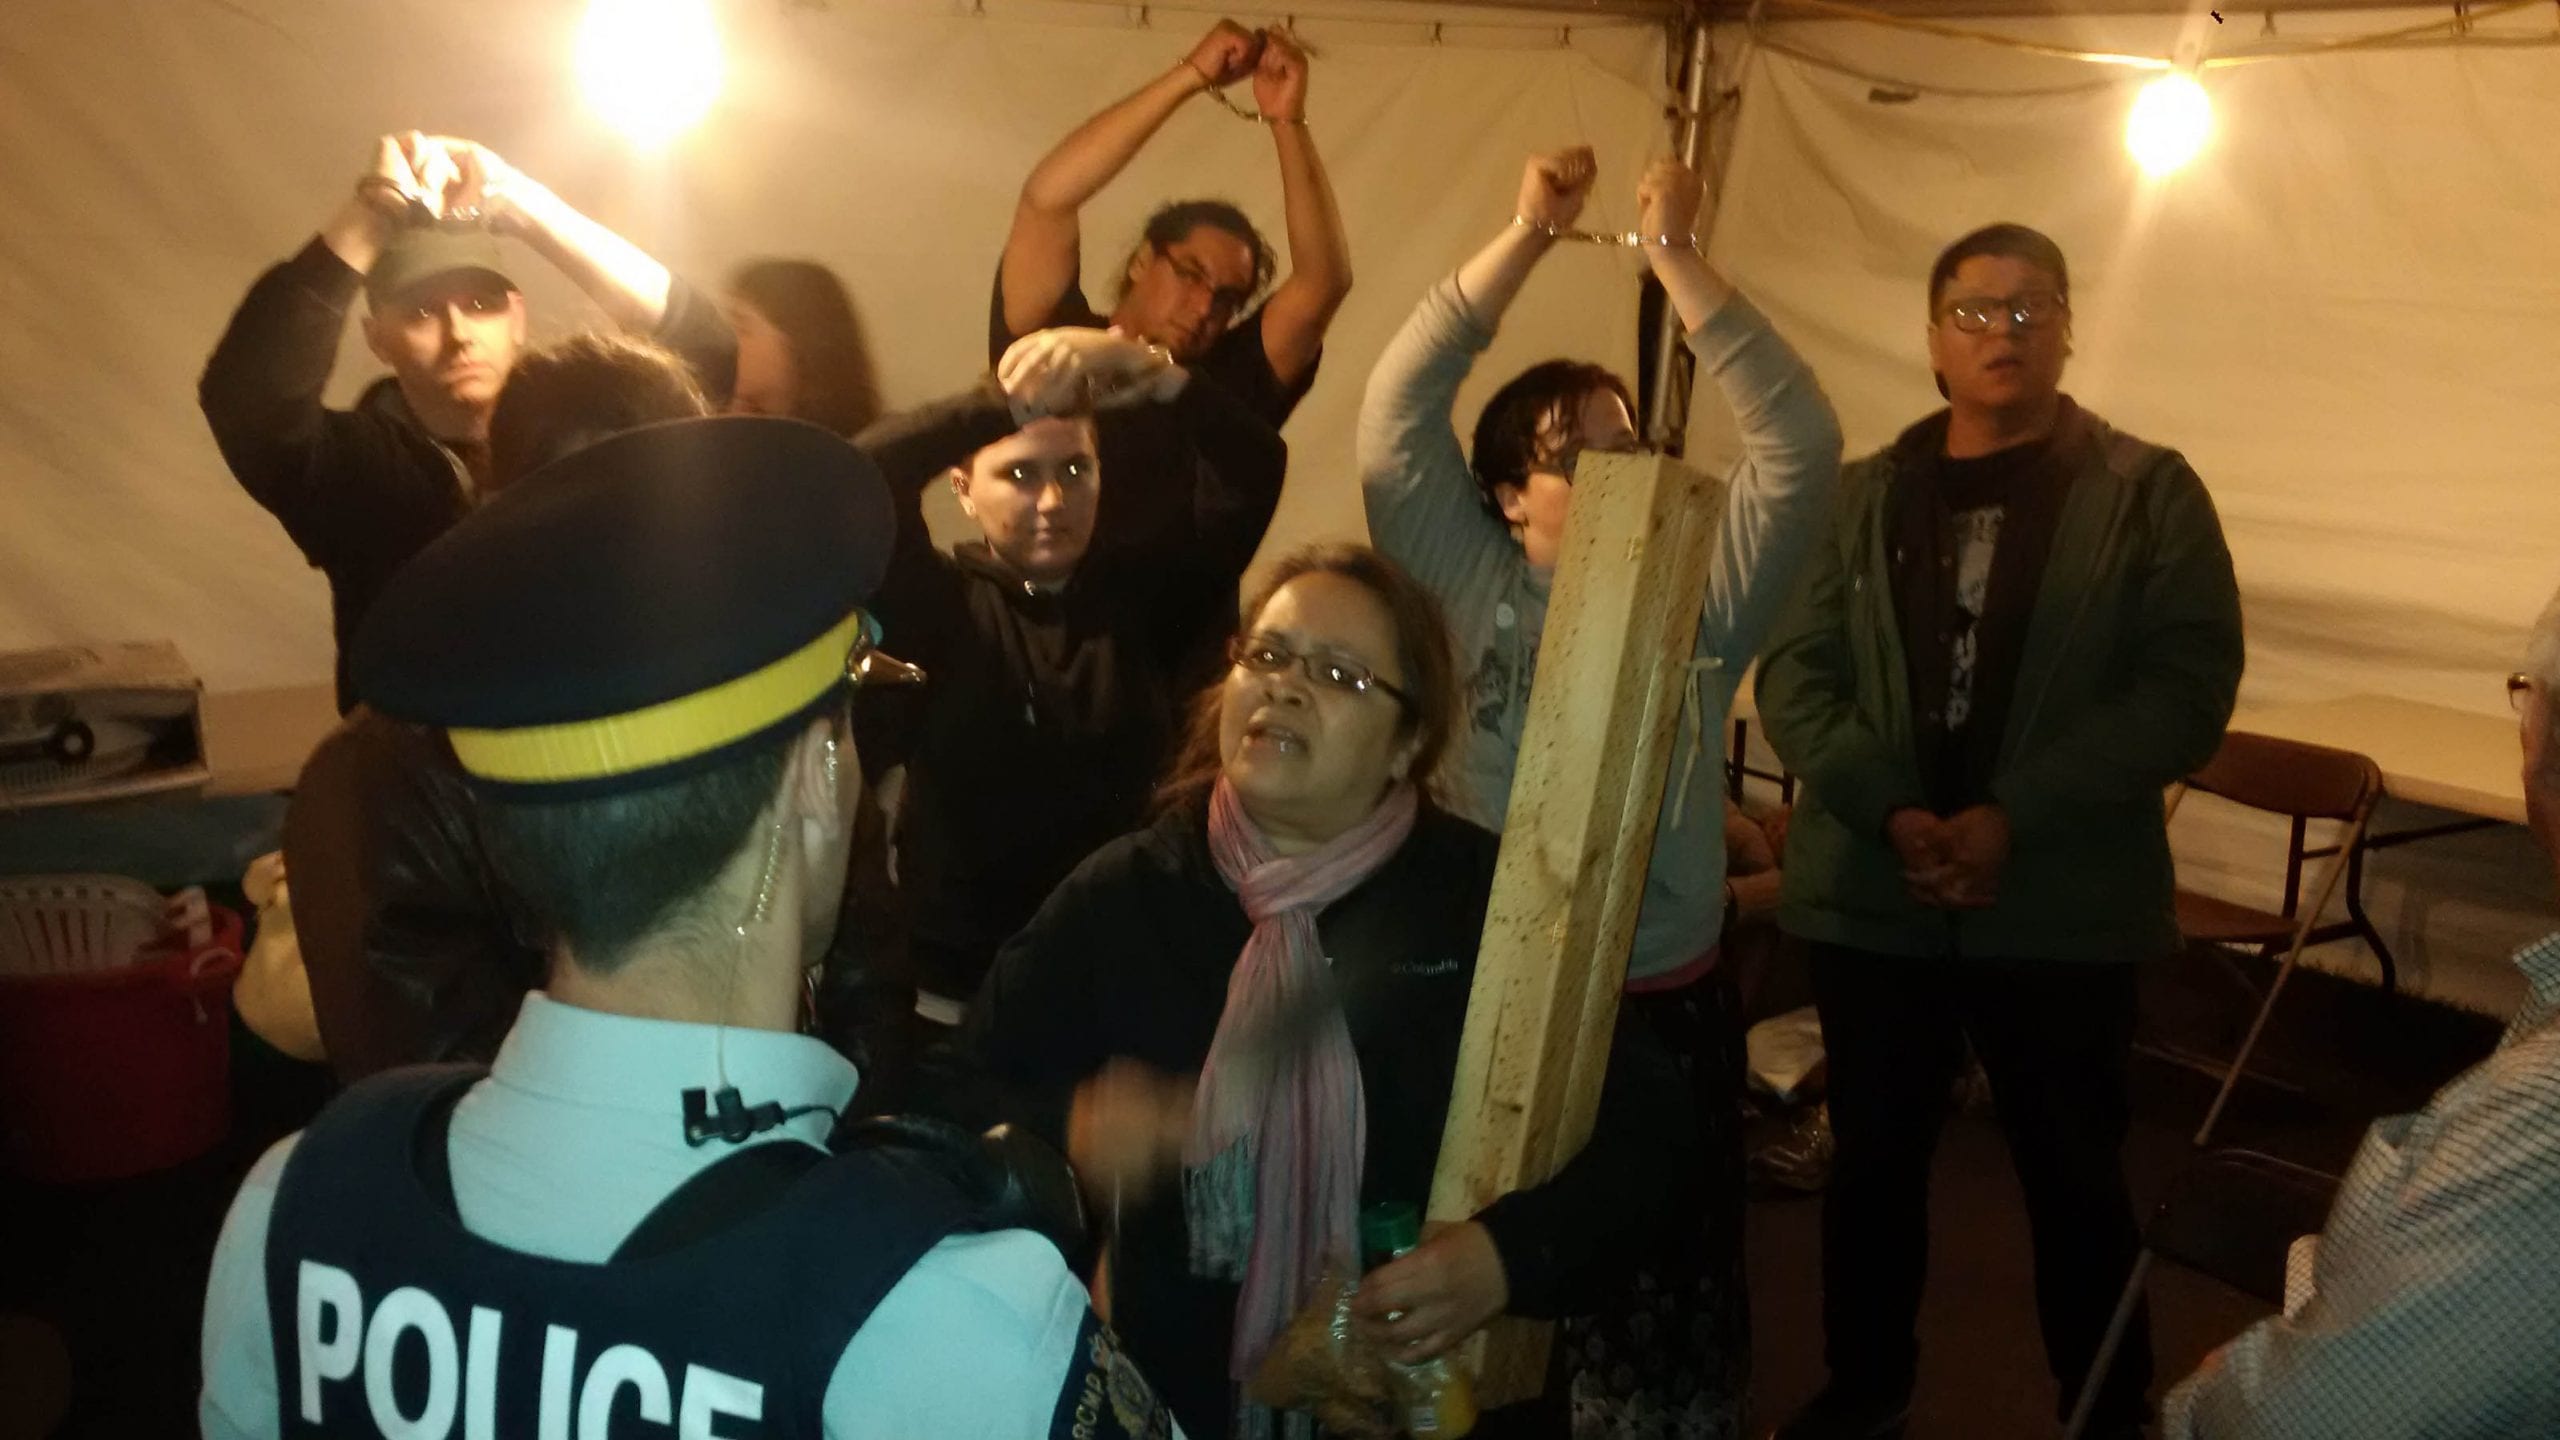 Prime Minister Trudeau visits Parliament Hill protest teepee